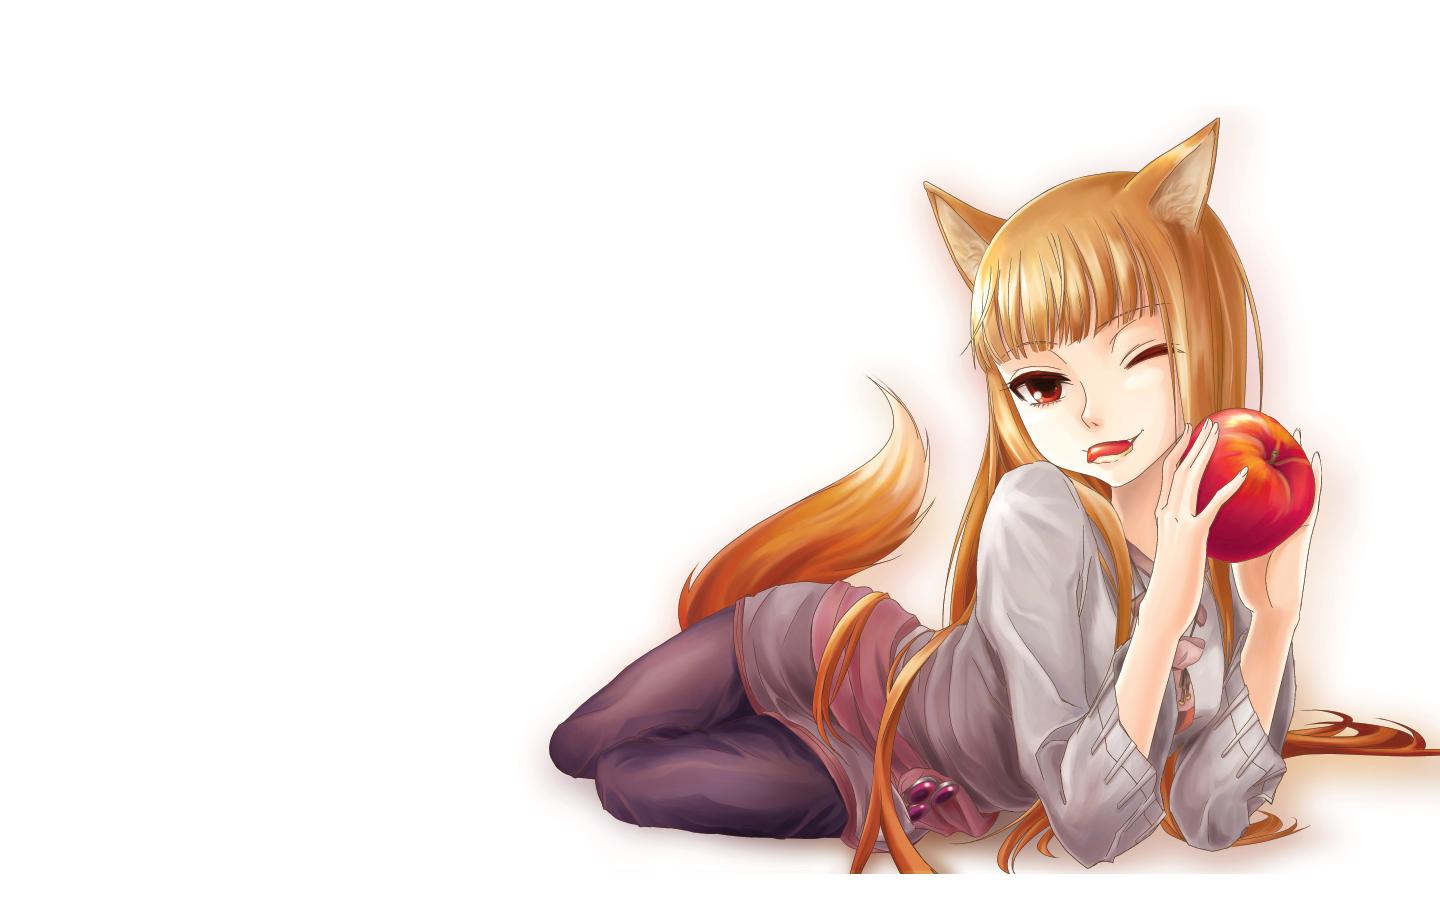 tails, Spice, And, Wolf, Long, Hair, Animal, Ears, Holo, The, Wise, Wolf, Apples, Simple, Background, Anime, Girls Wallpaper